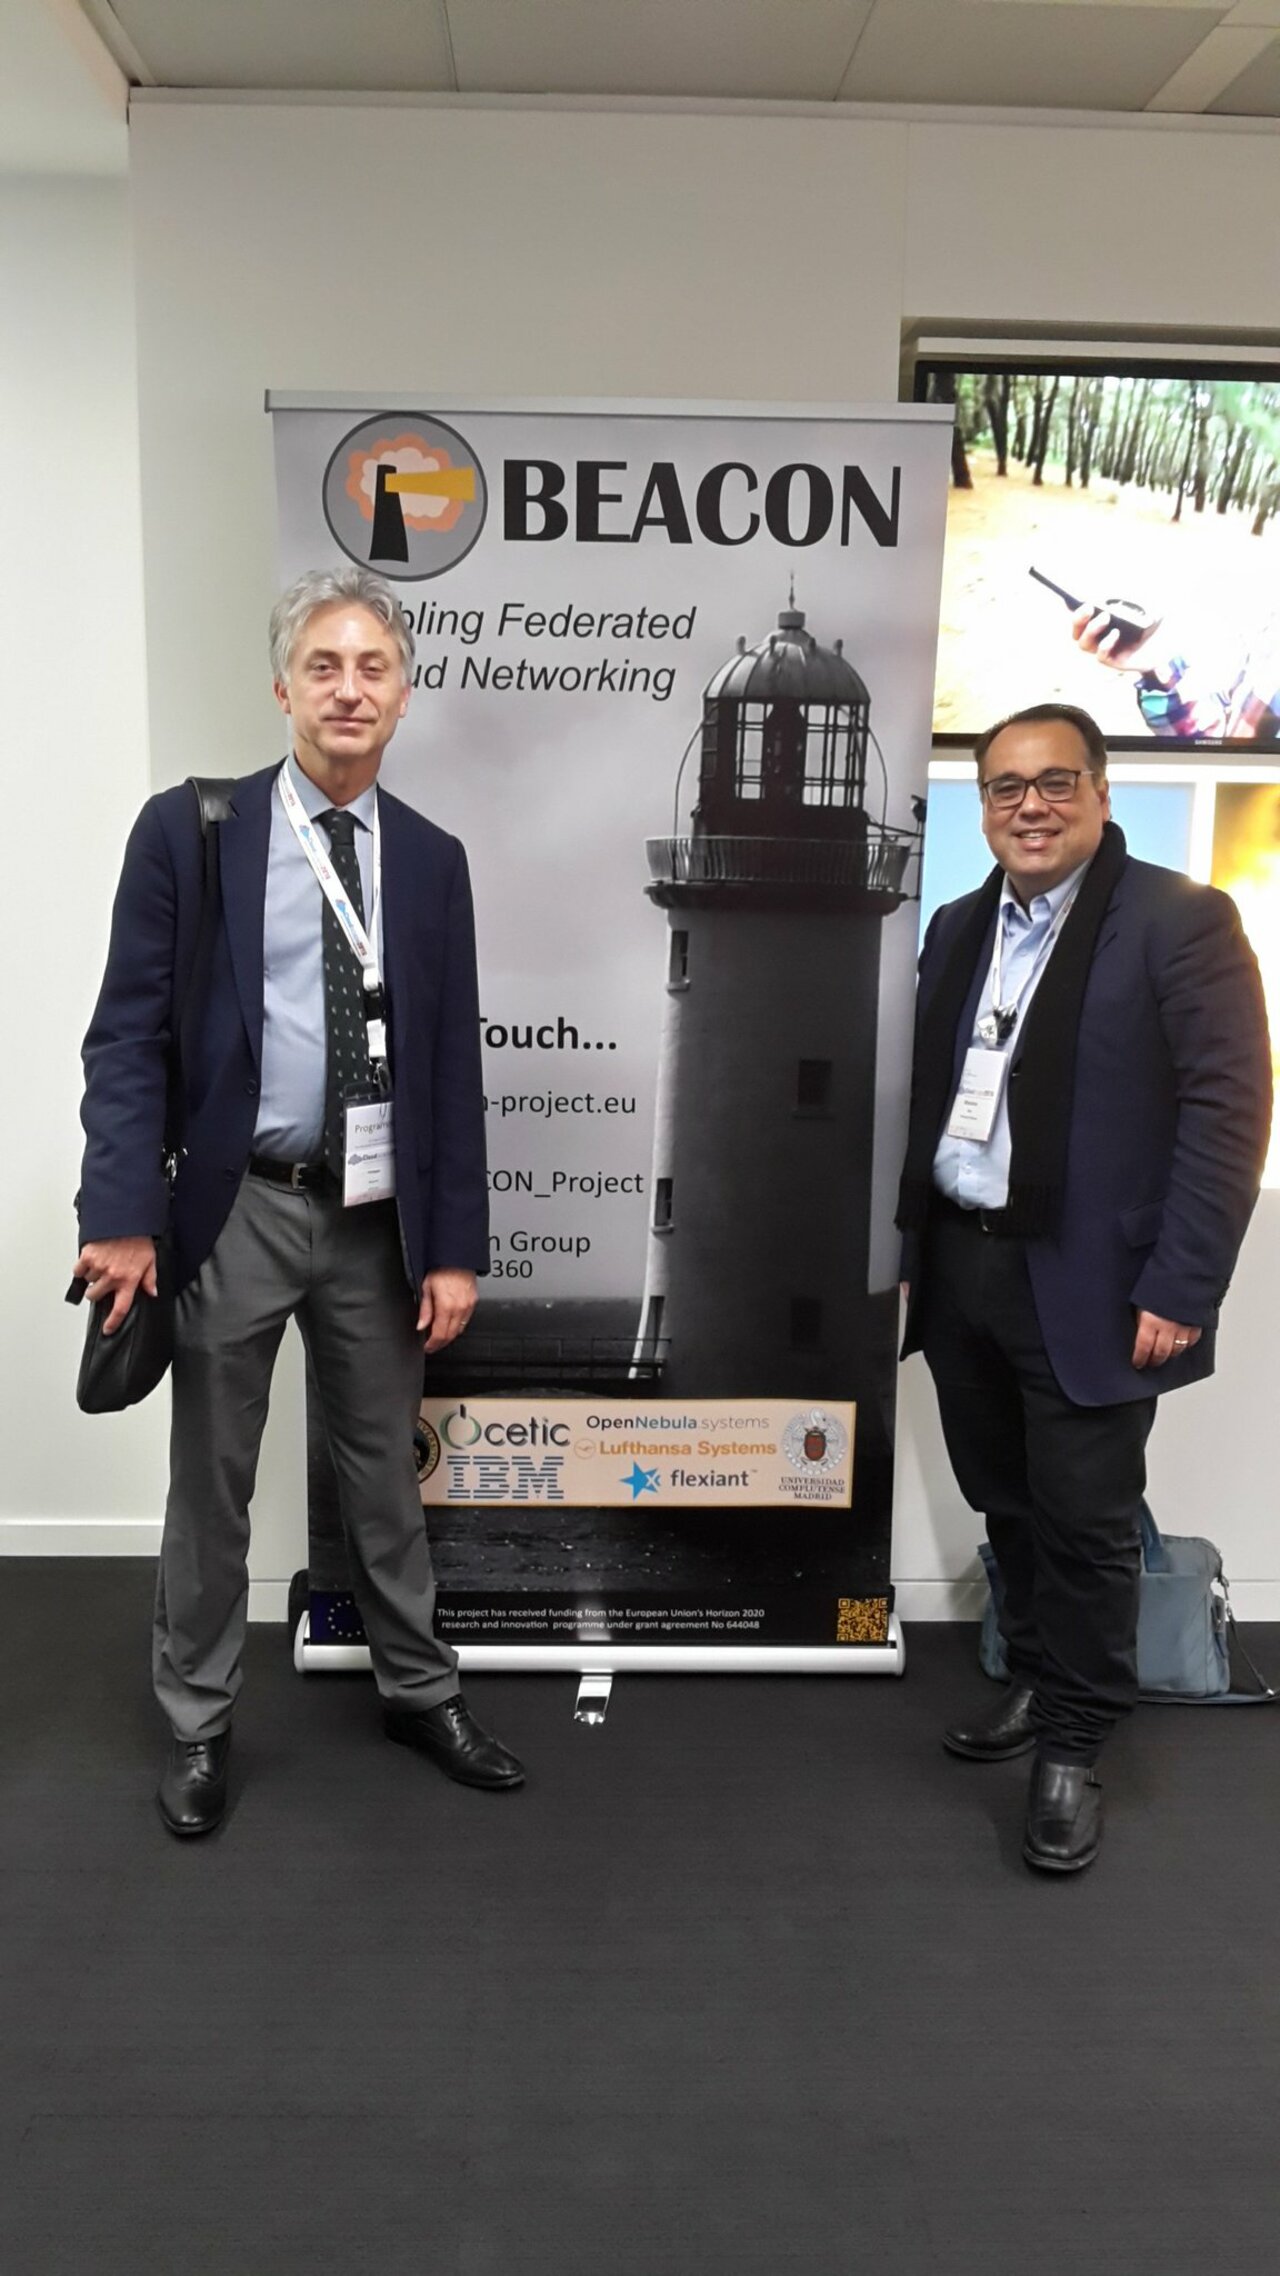 Philippe Massonet represents the @BEACON_Project at #cloudscape2016 conf. https://www.cetic.be/CloudScape-2016-2818 @CloudscapeSerie https://t.co/LcyCxXhNxq